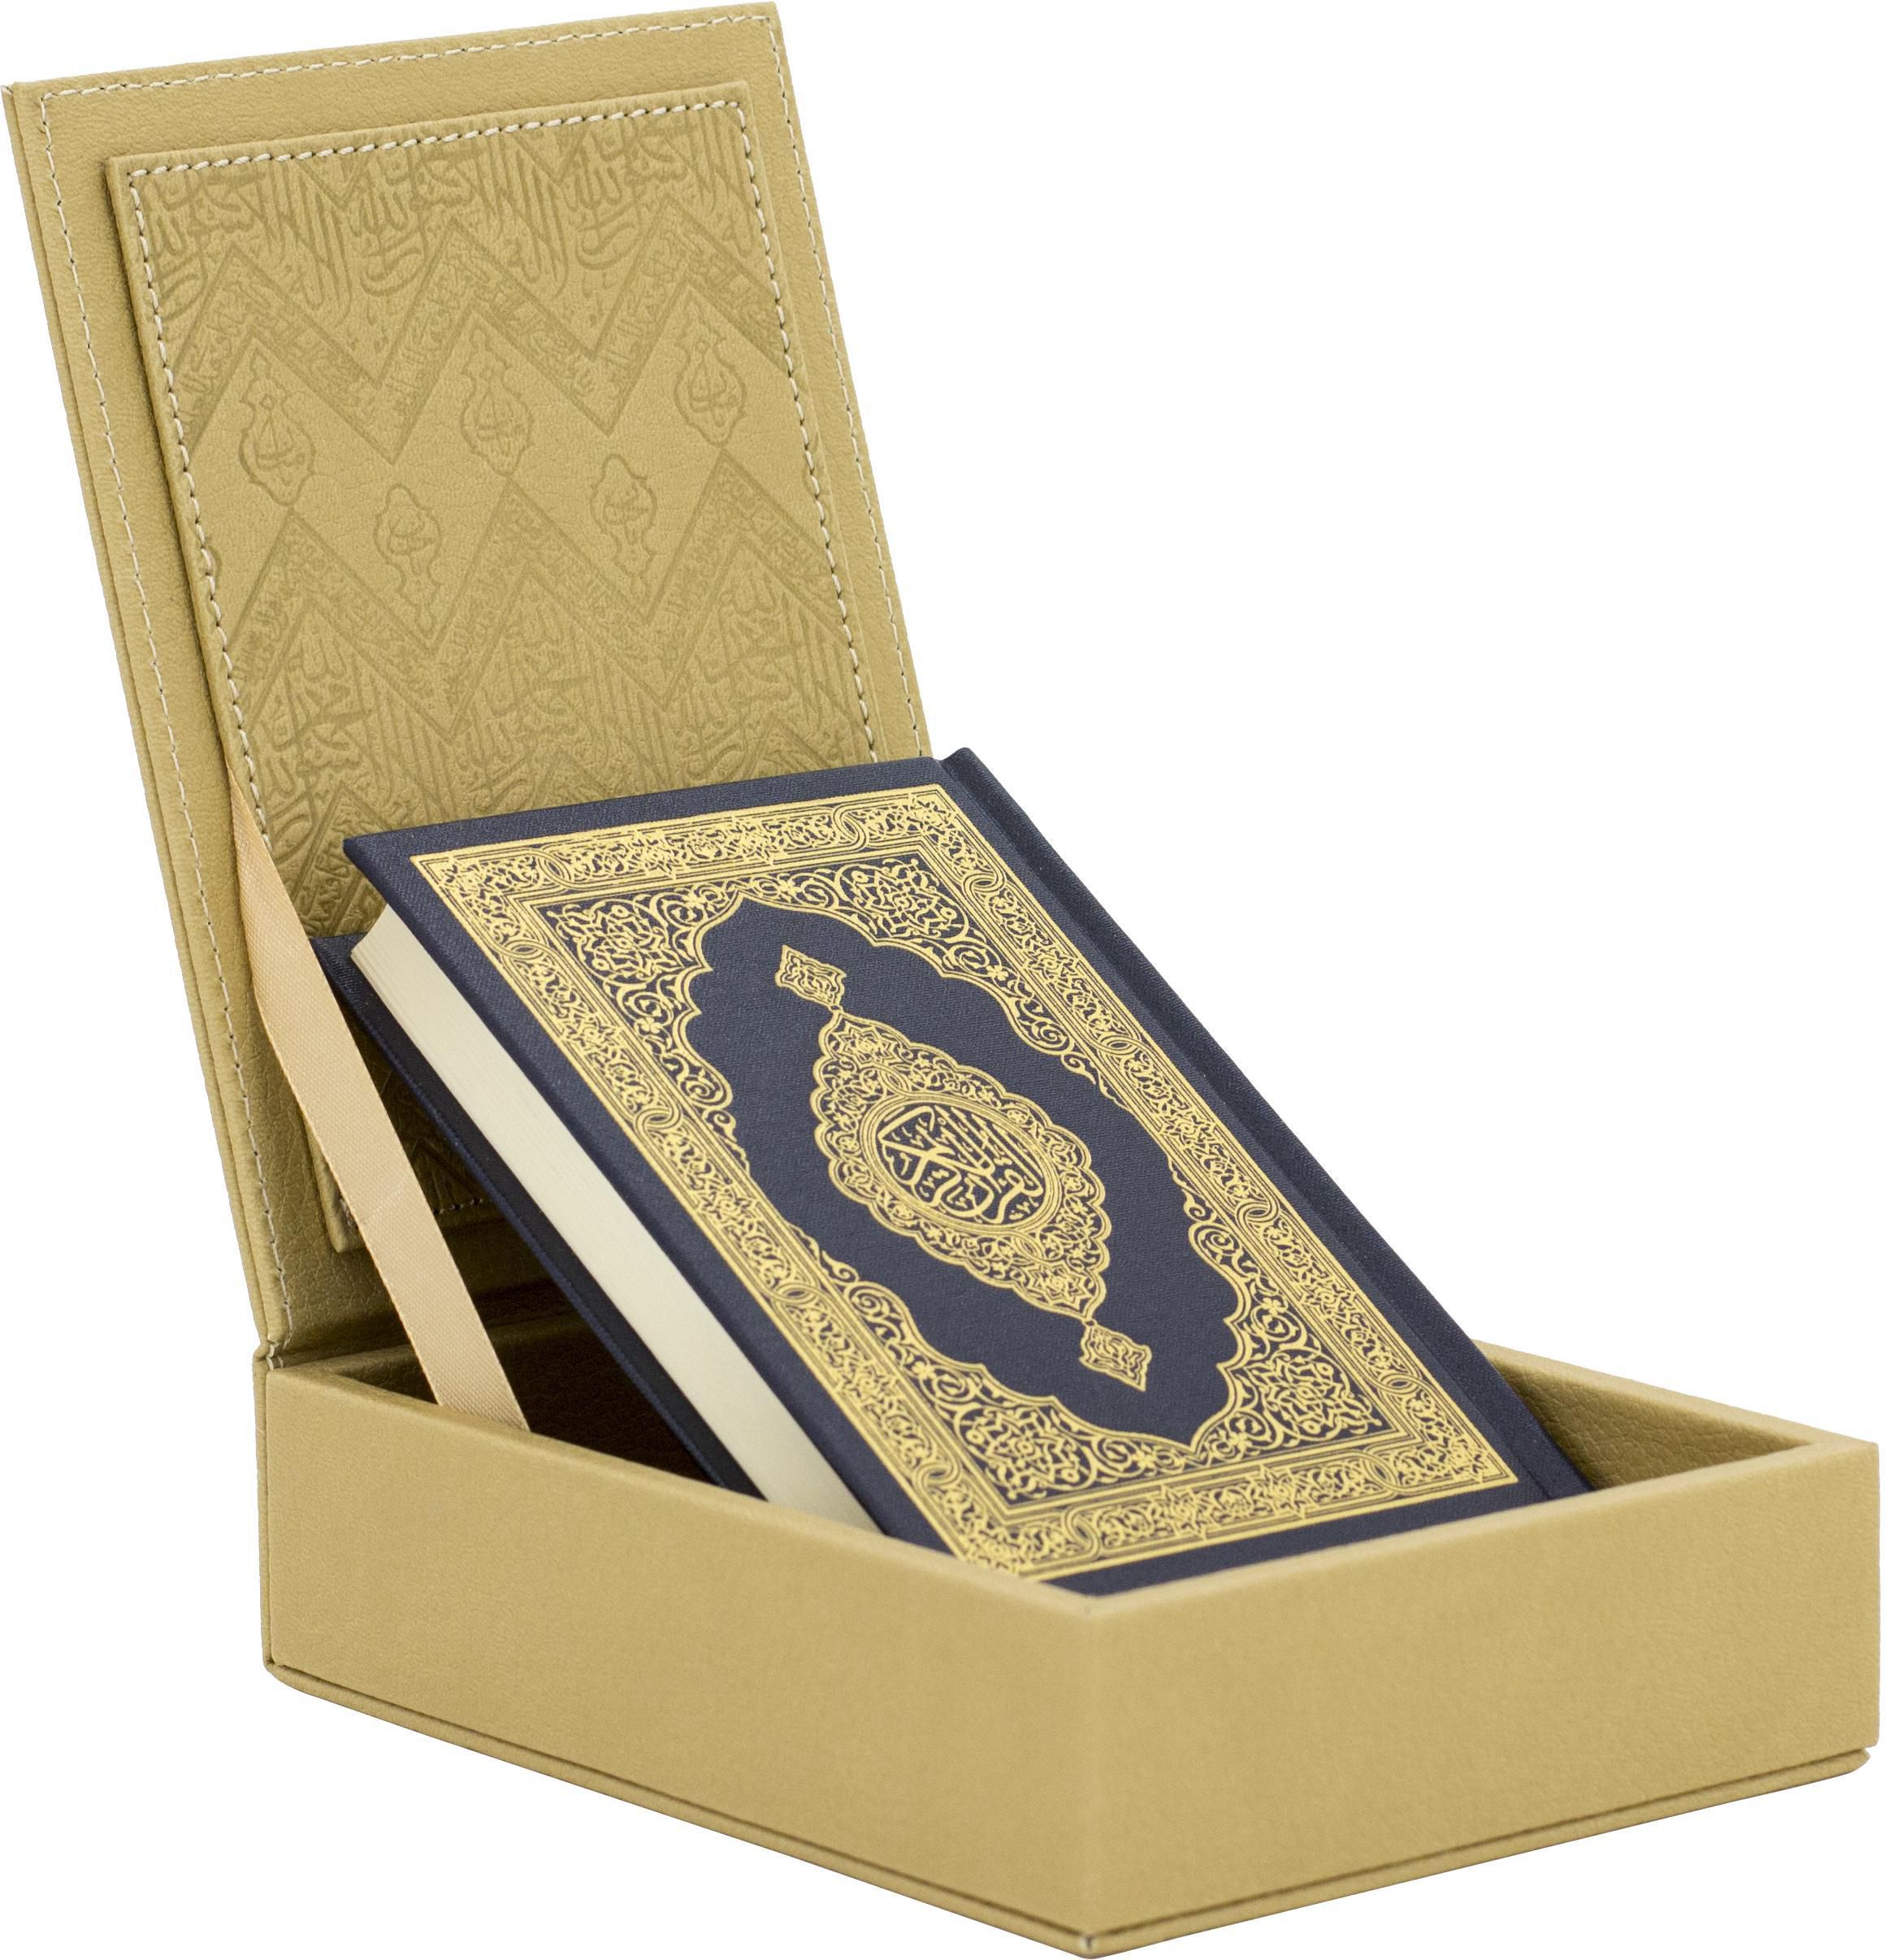 Qur'an with Box